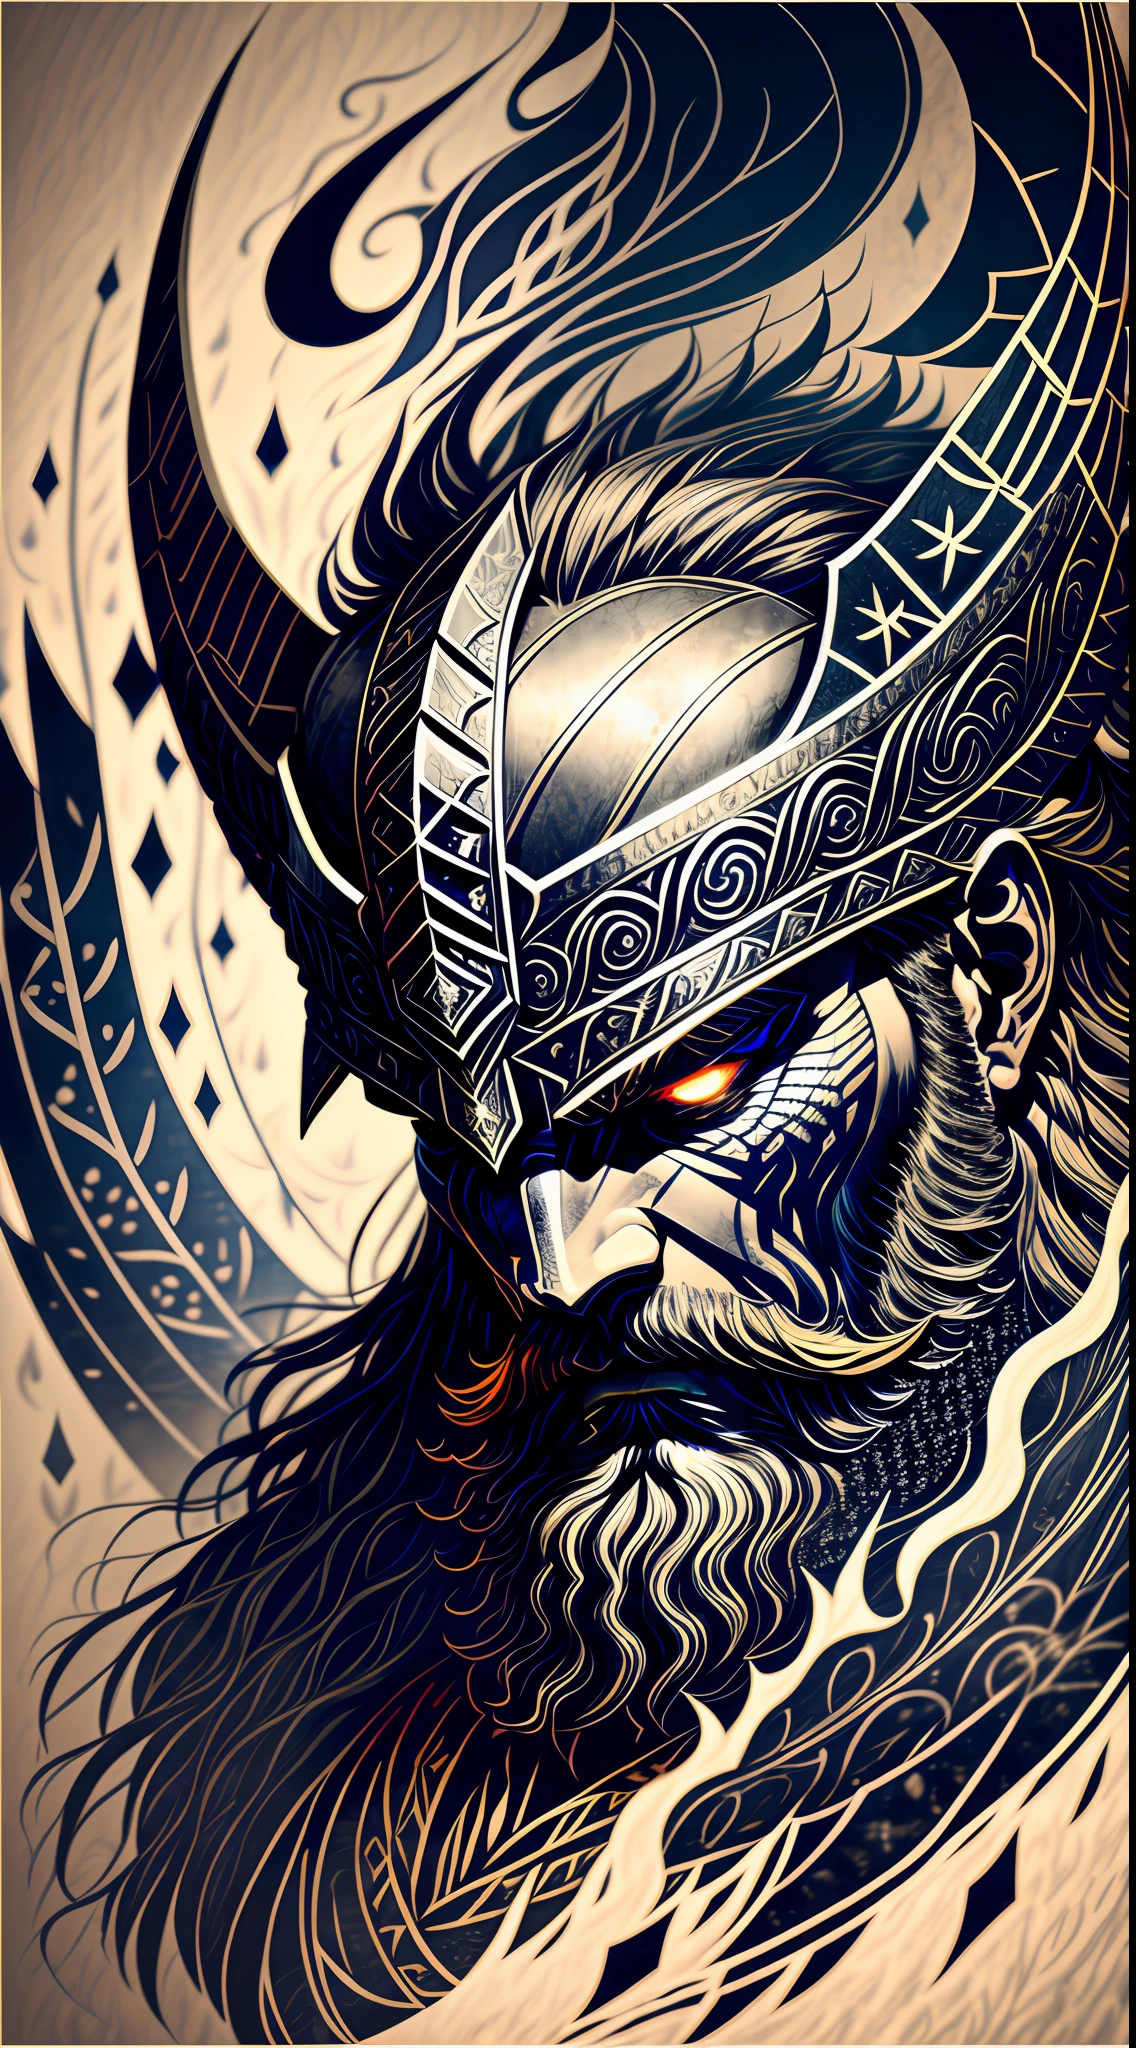 An intense close-up of a Viking warrior with piercing, glowing eyes, surrounded by an inky darkness. His horned helmet gives him an imposing silhouette, while his wild, flowing beard adds a touch of ruggedness. The warrior's face bears an expression of deep anger, a testament to his ferocity in battle. The backdrop is filled with swirling tendrils of inky blackness, reminiscent of ancient mythological forces. The atmosphere is tense, hinting at the mythical powers that surround the warrior. The image combines high detail and an artistic touch, creating a captivating visual experience. Artwork, ink on parchment